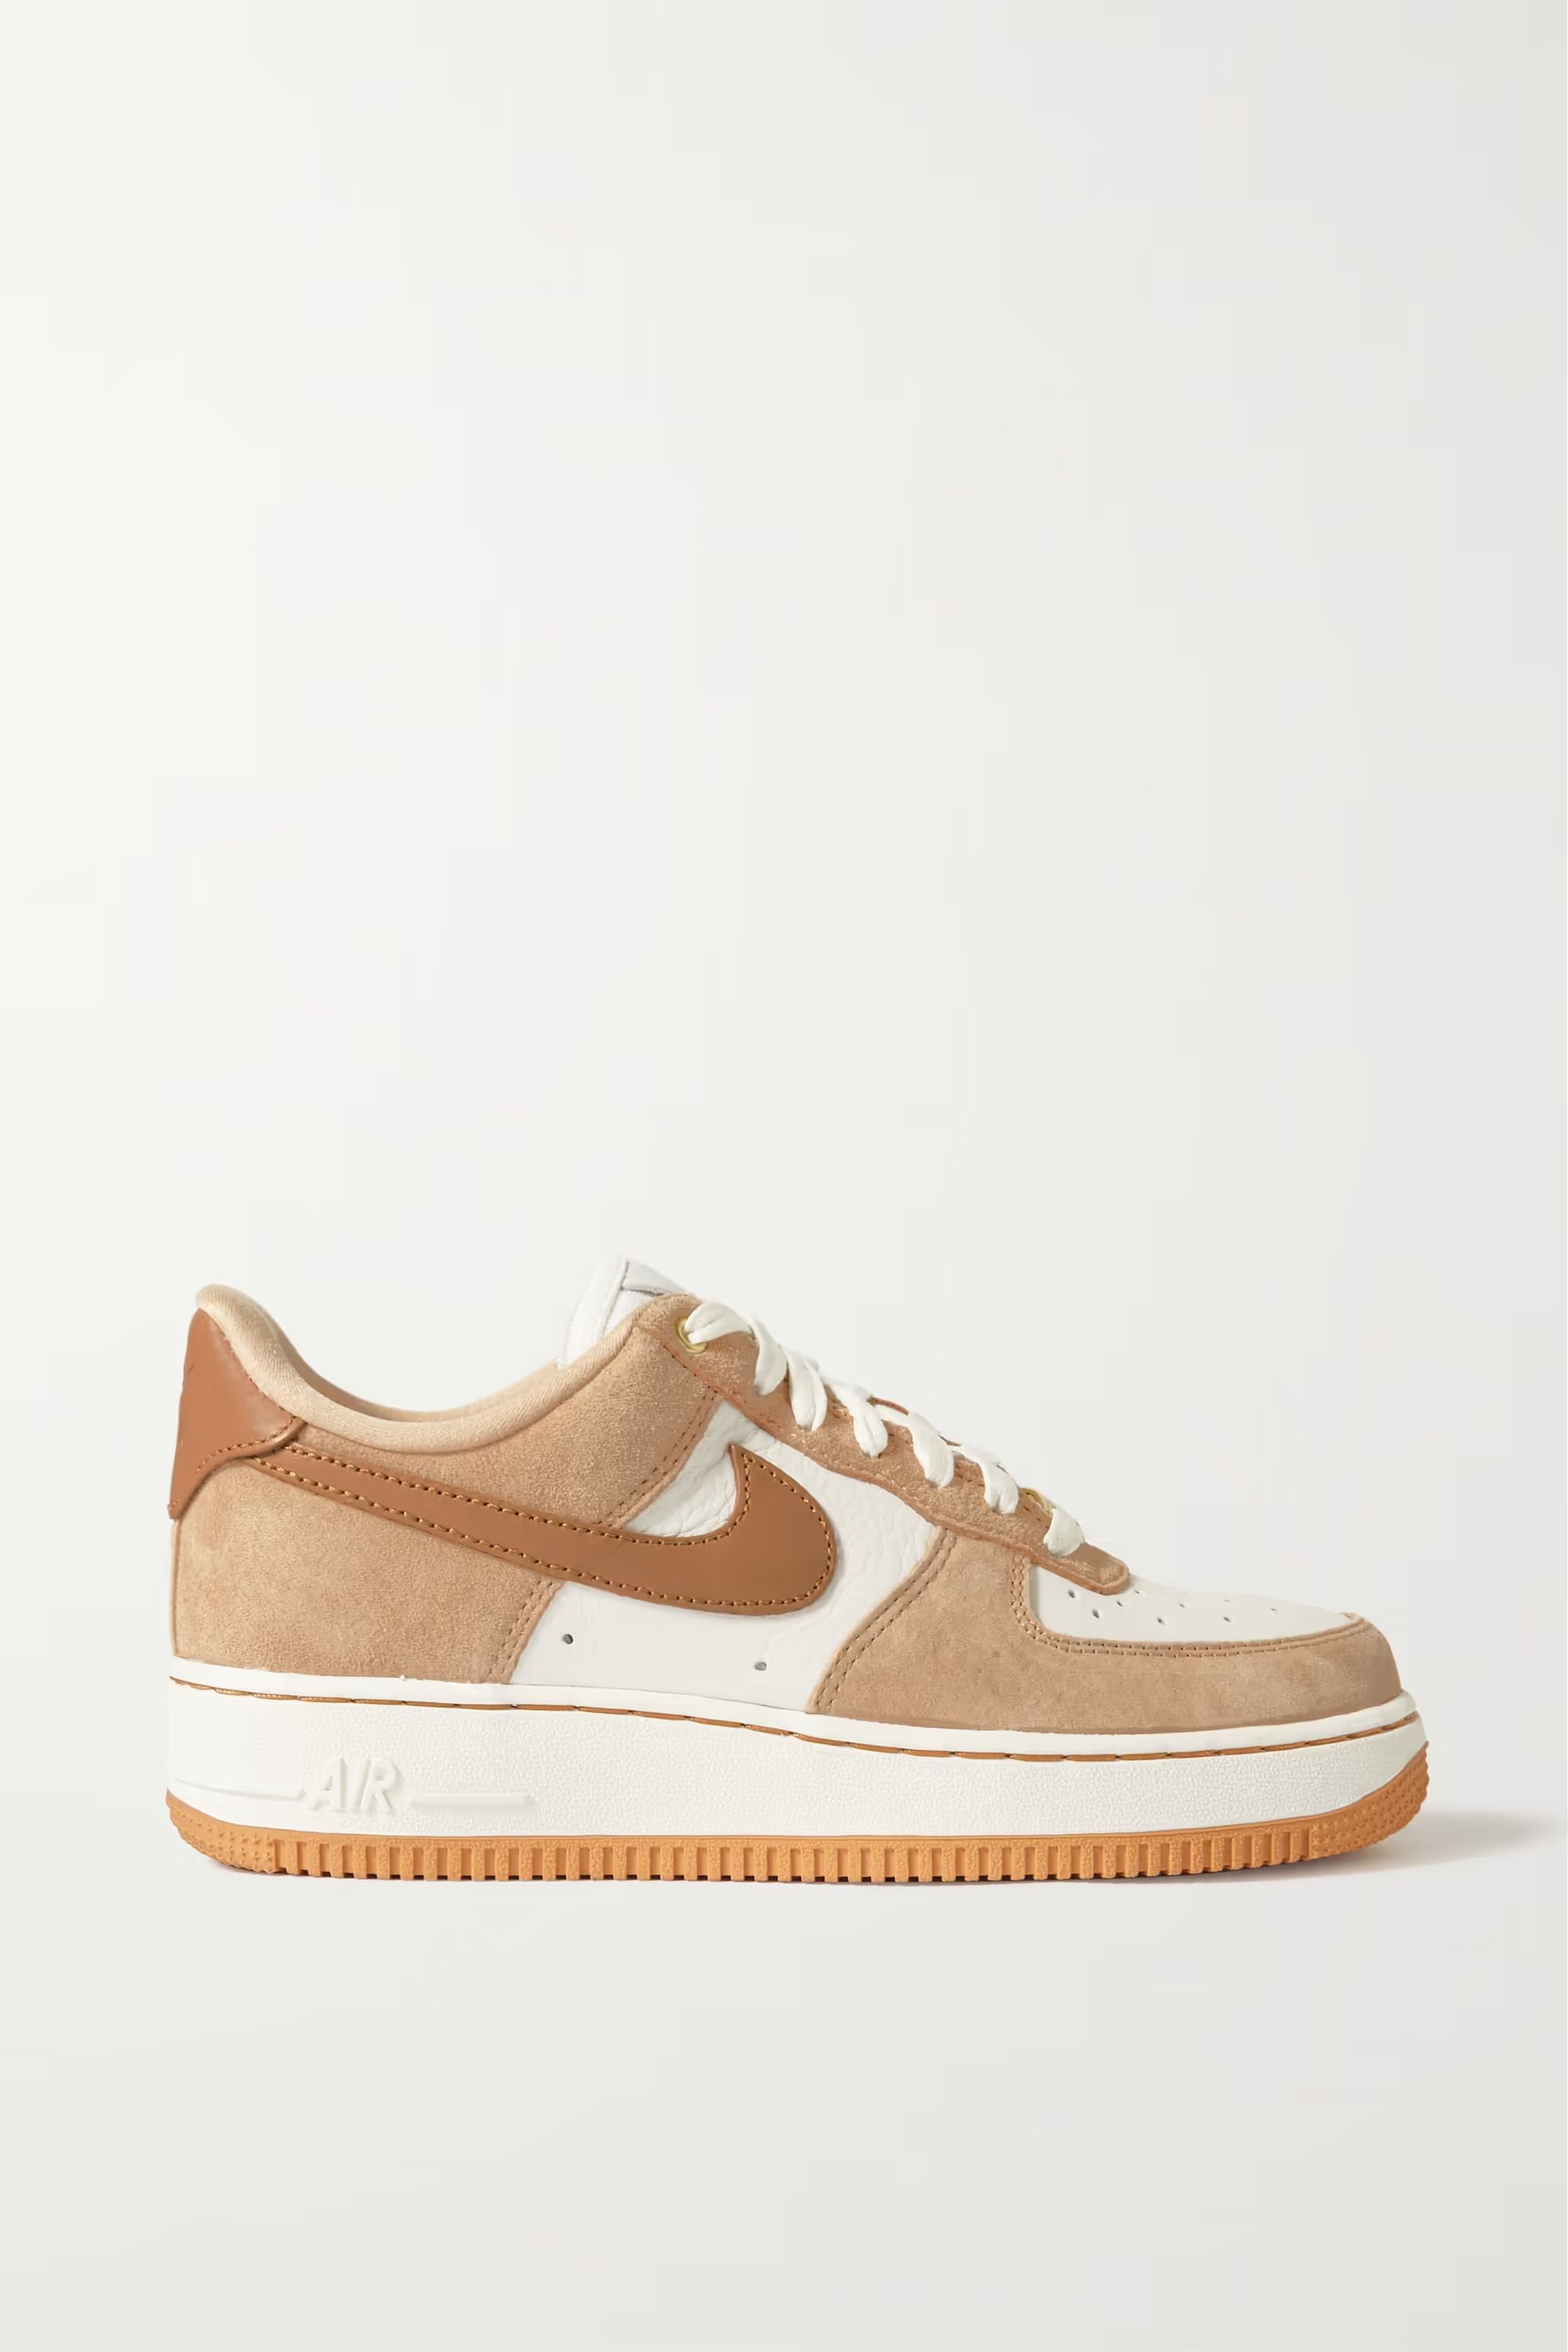 Air Force 1 LXX leather and suede sneakers | NET-A-PORTER (US)